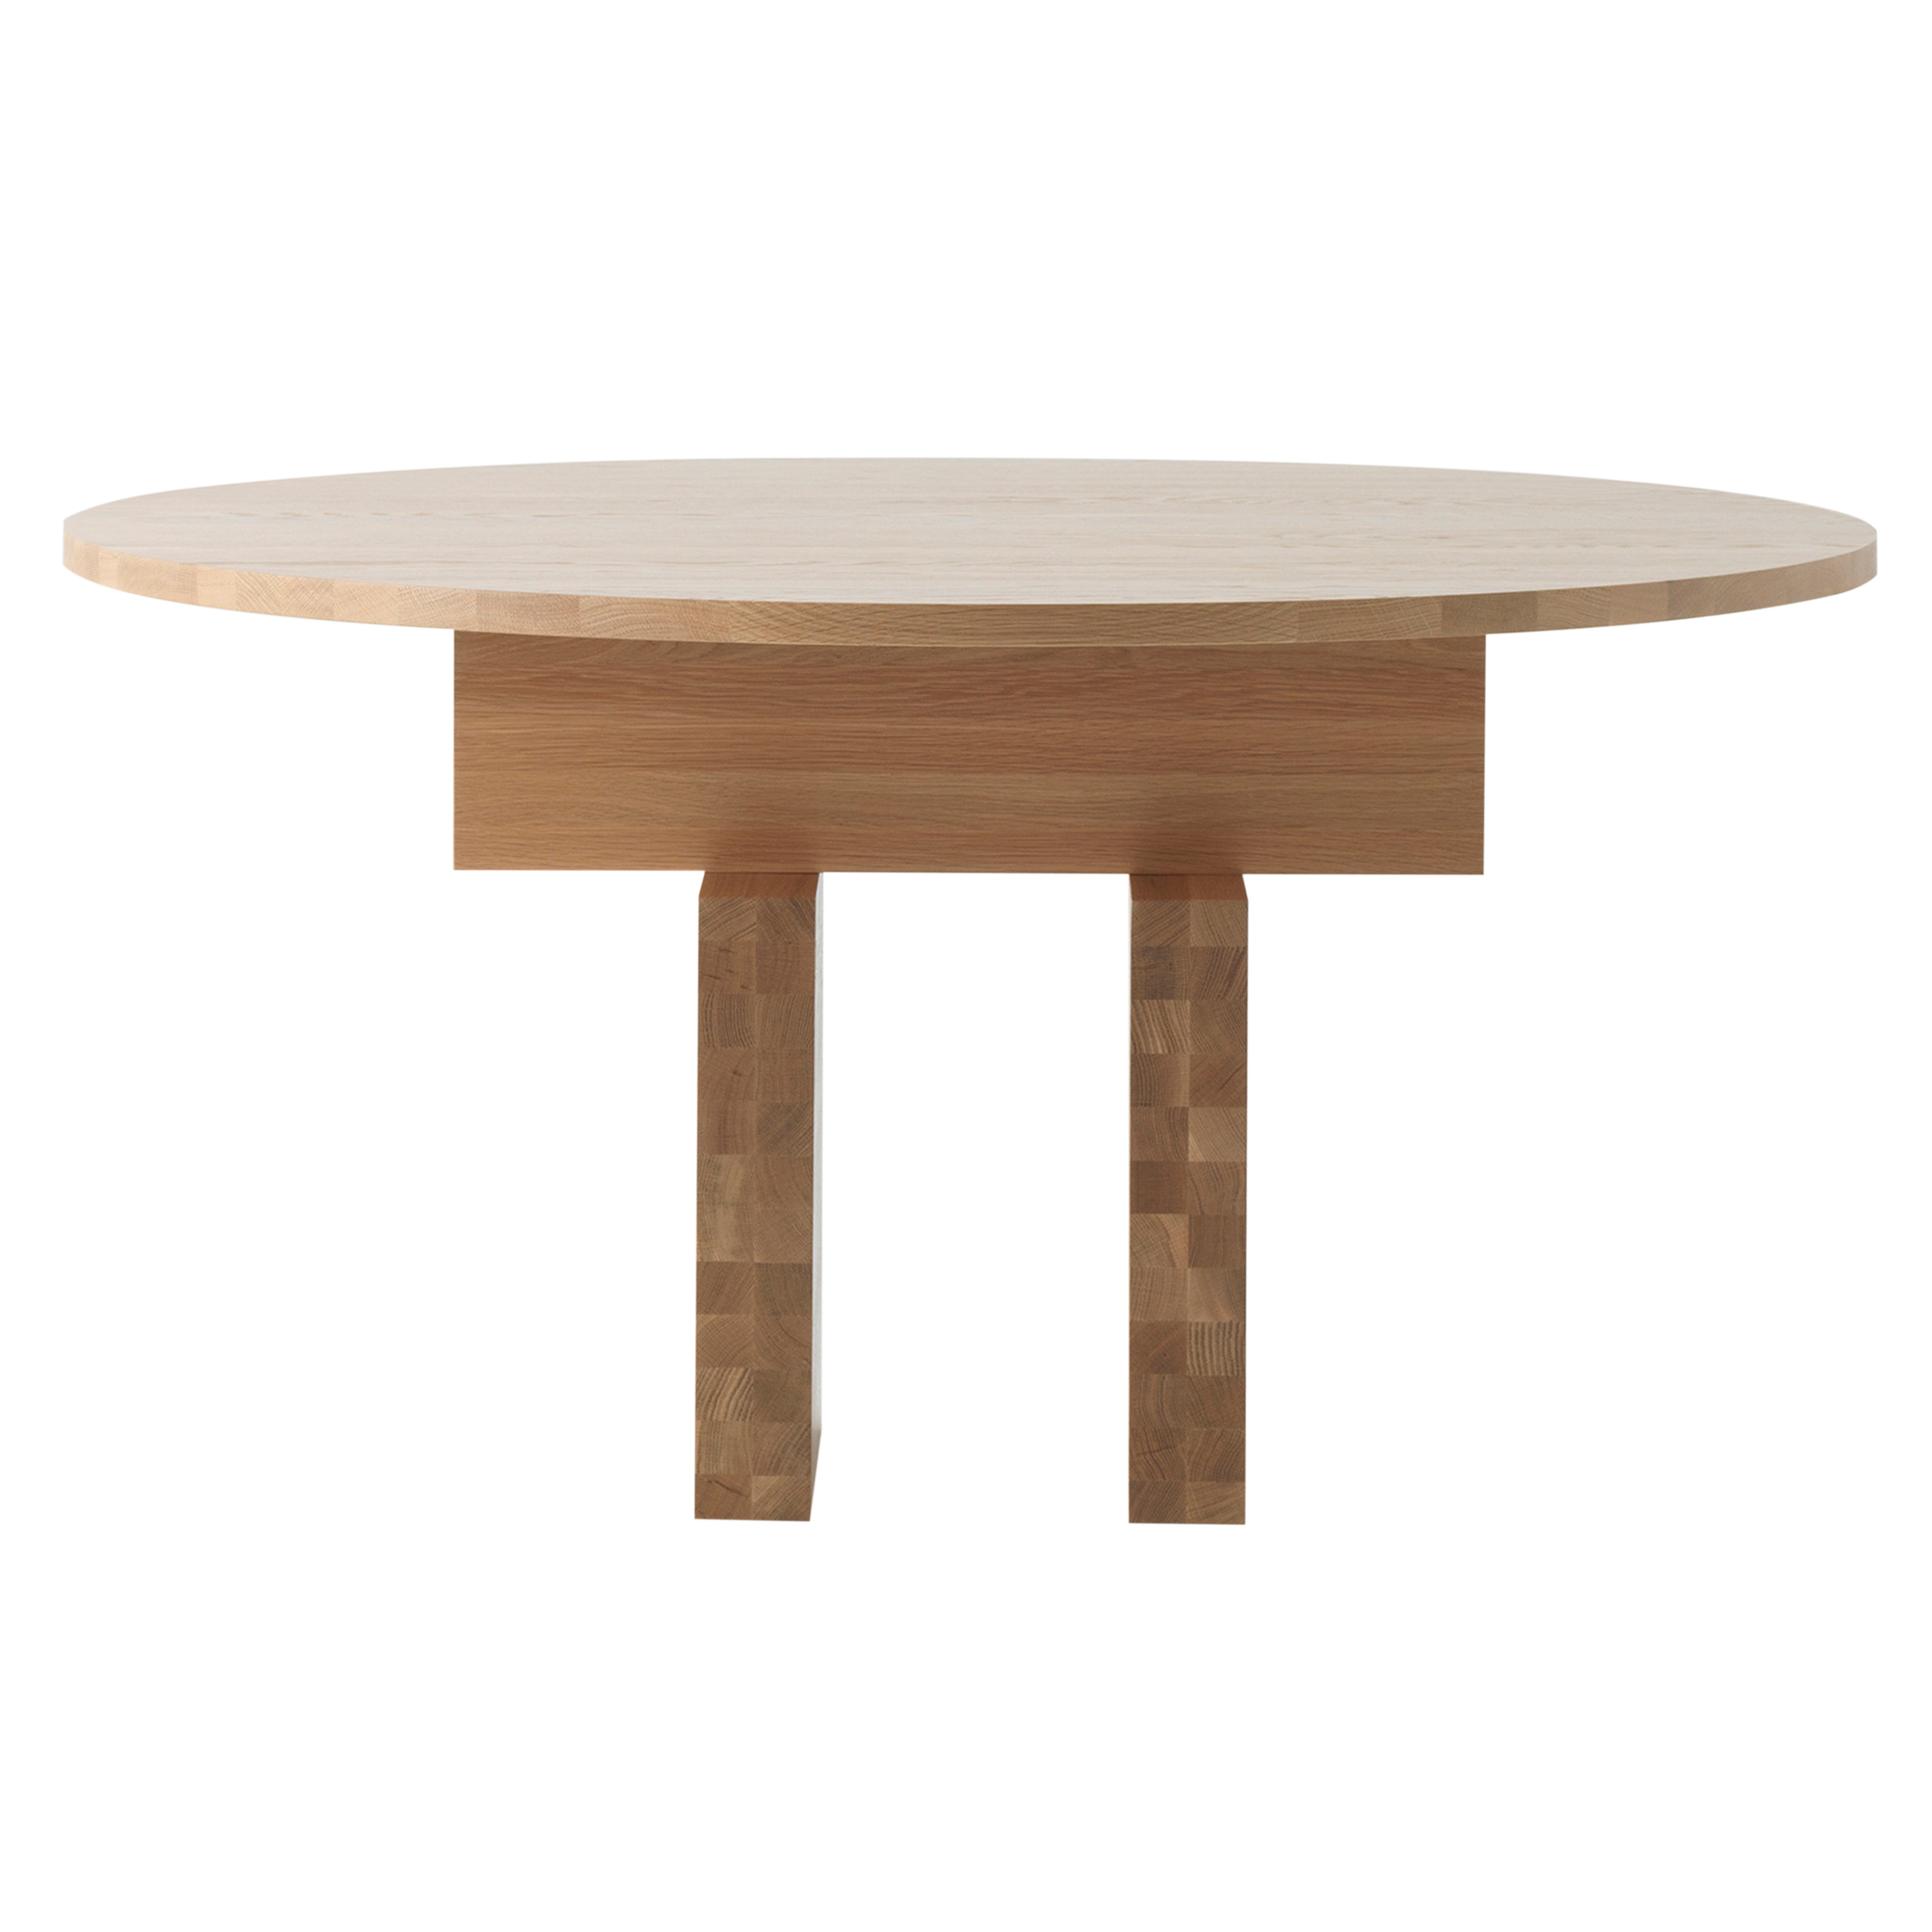 Plane Round Dining Table: Large - 63